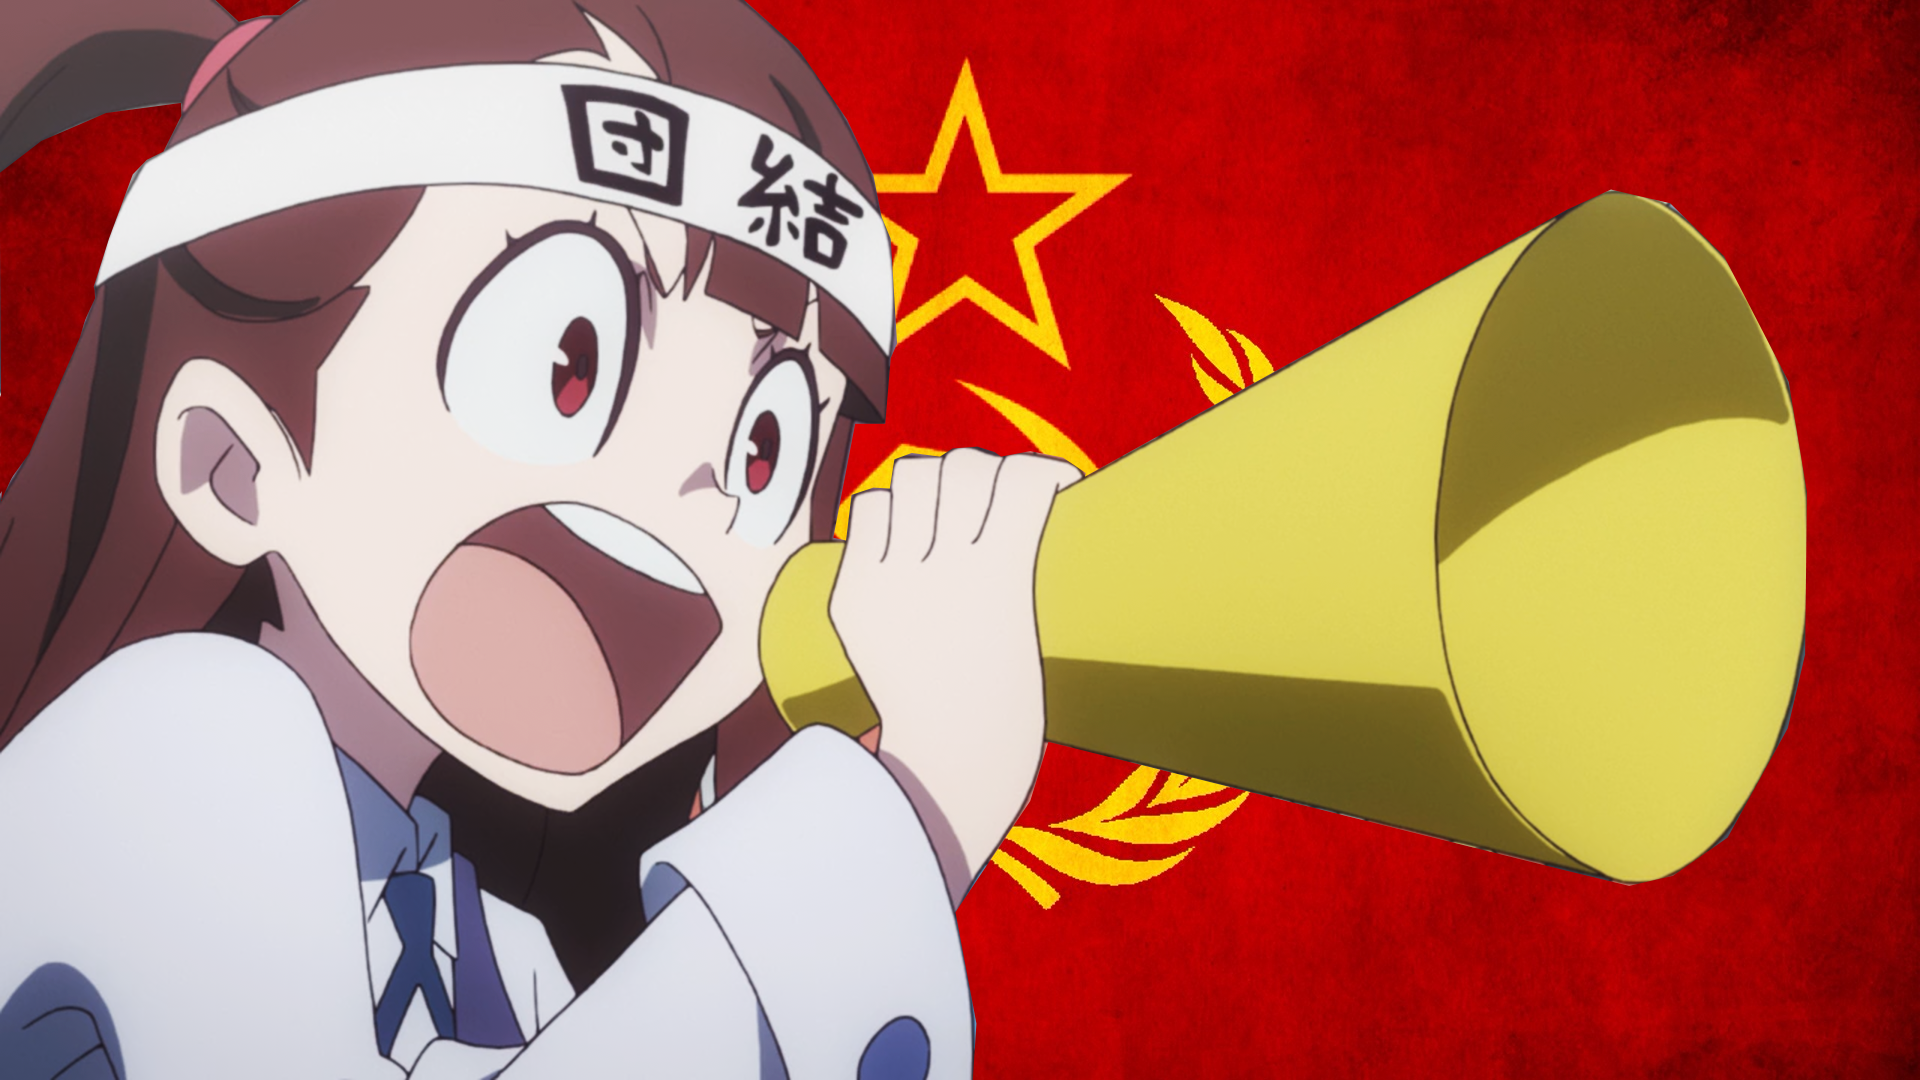 commie akko.png.